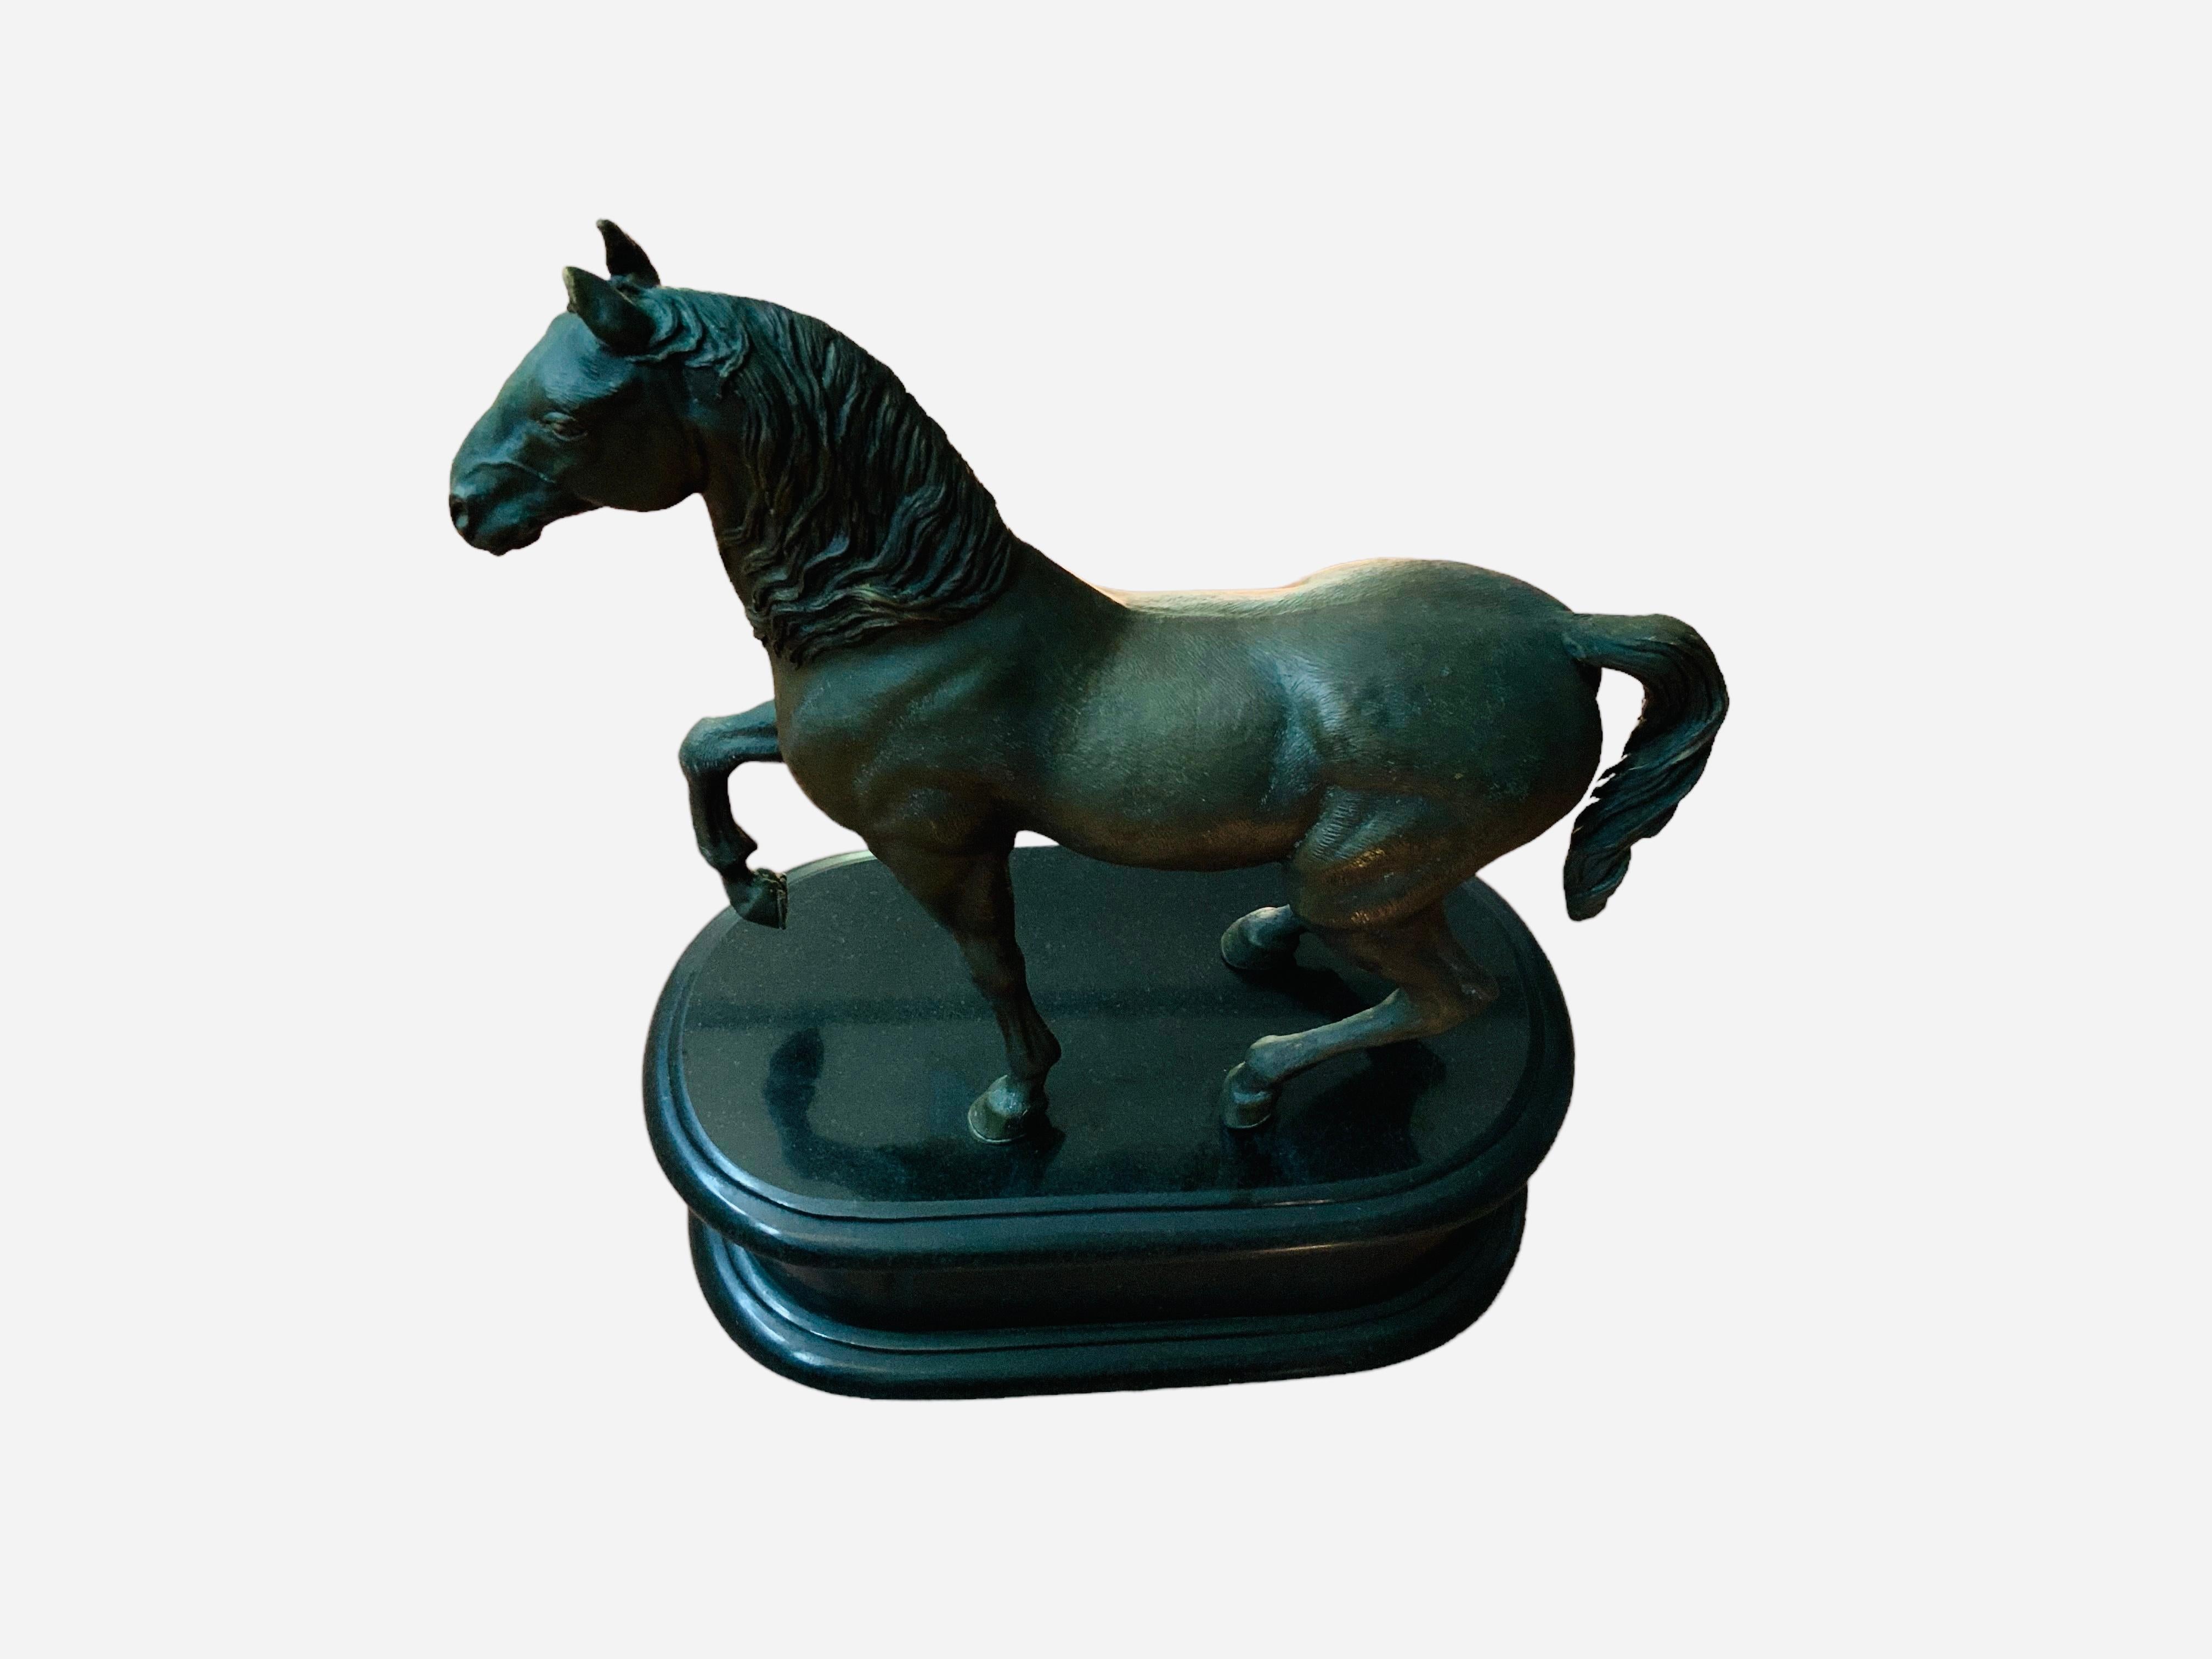 This is a heavy patinated bronze sculpture of a “Paso Fino”horse. “Paso Fino” means a horse with a fine step. These horses have a unique and natural smooth gait since birth. It depicts a large hairy proud horse with strong stamina that is starting